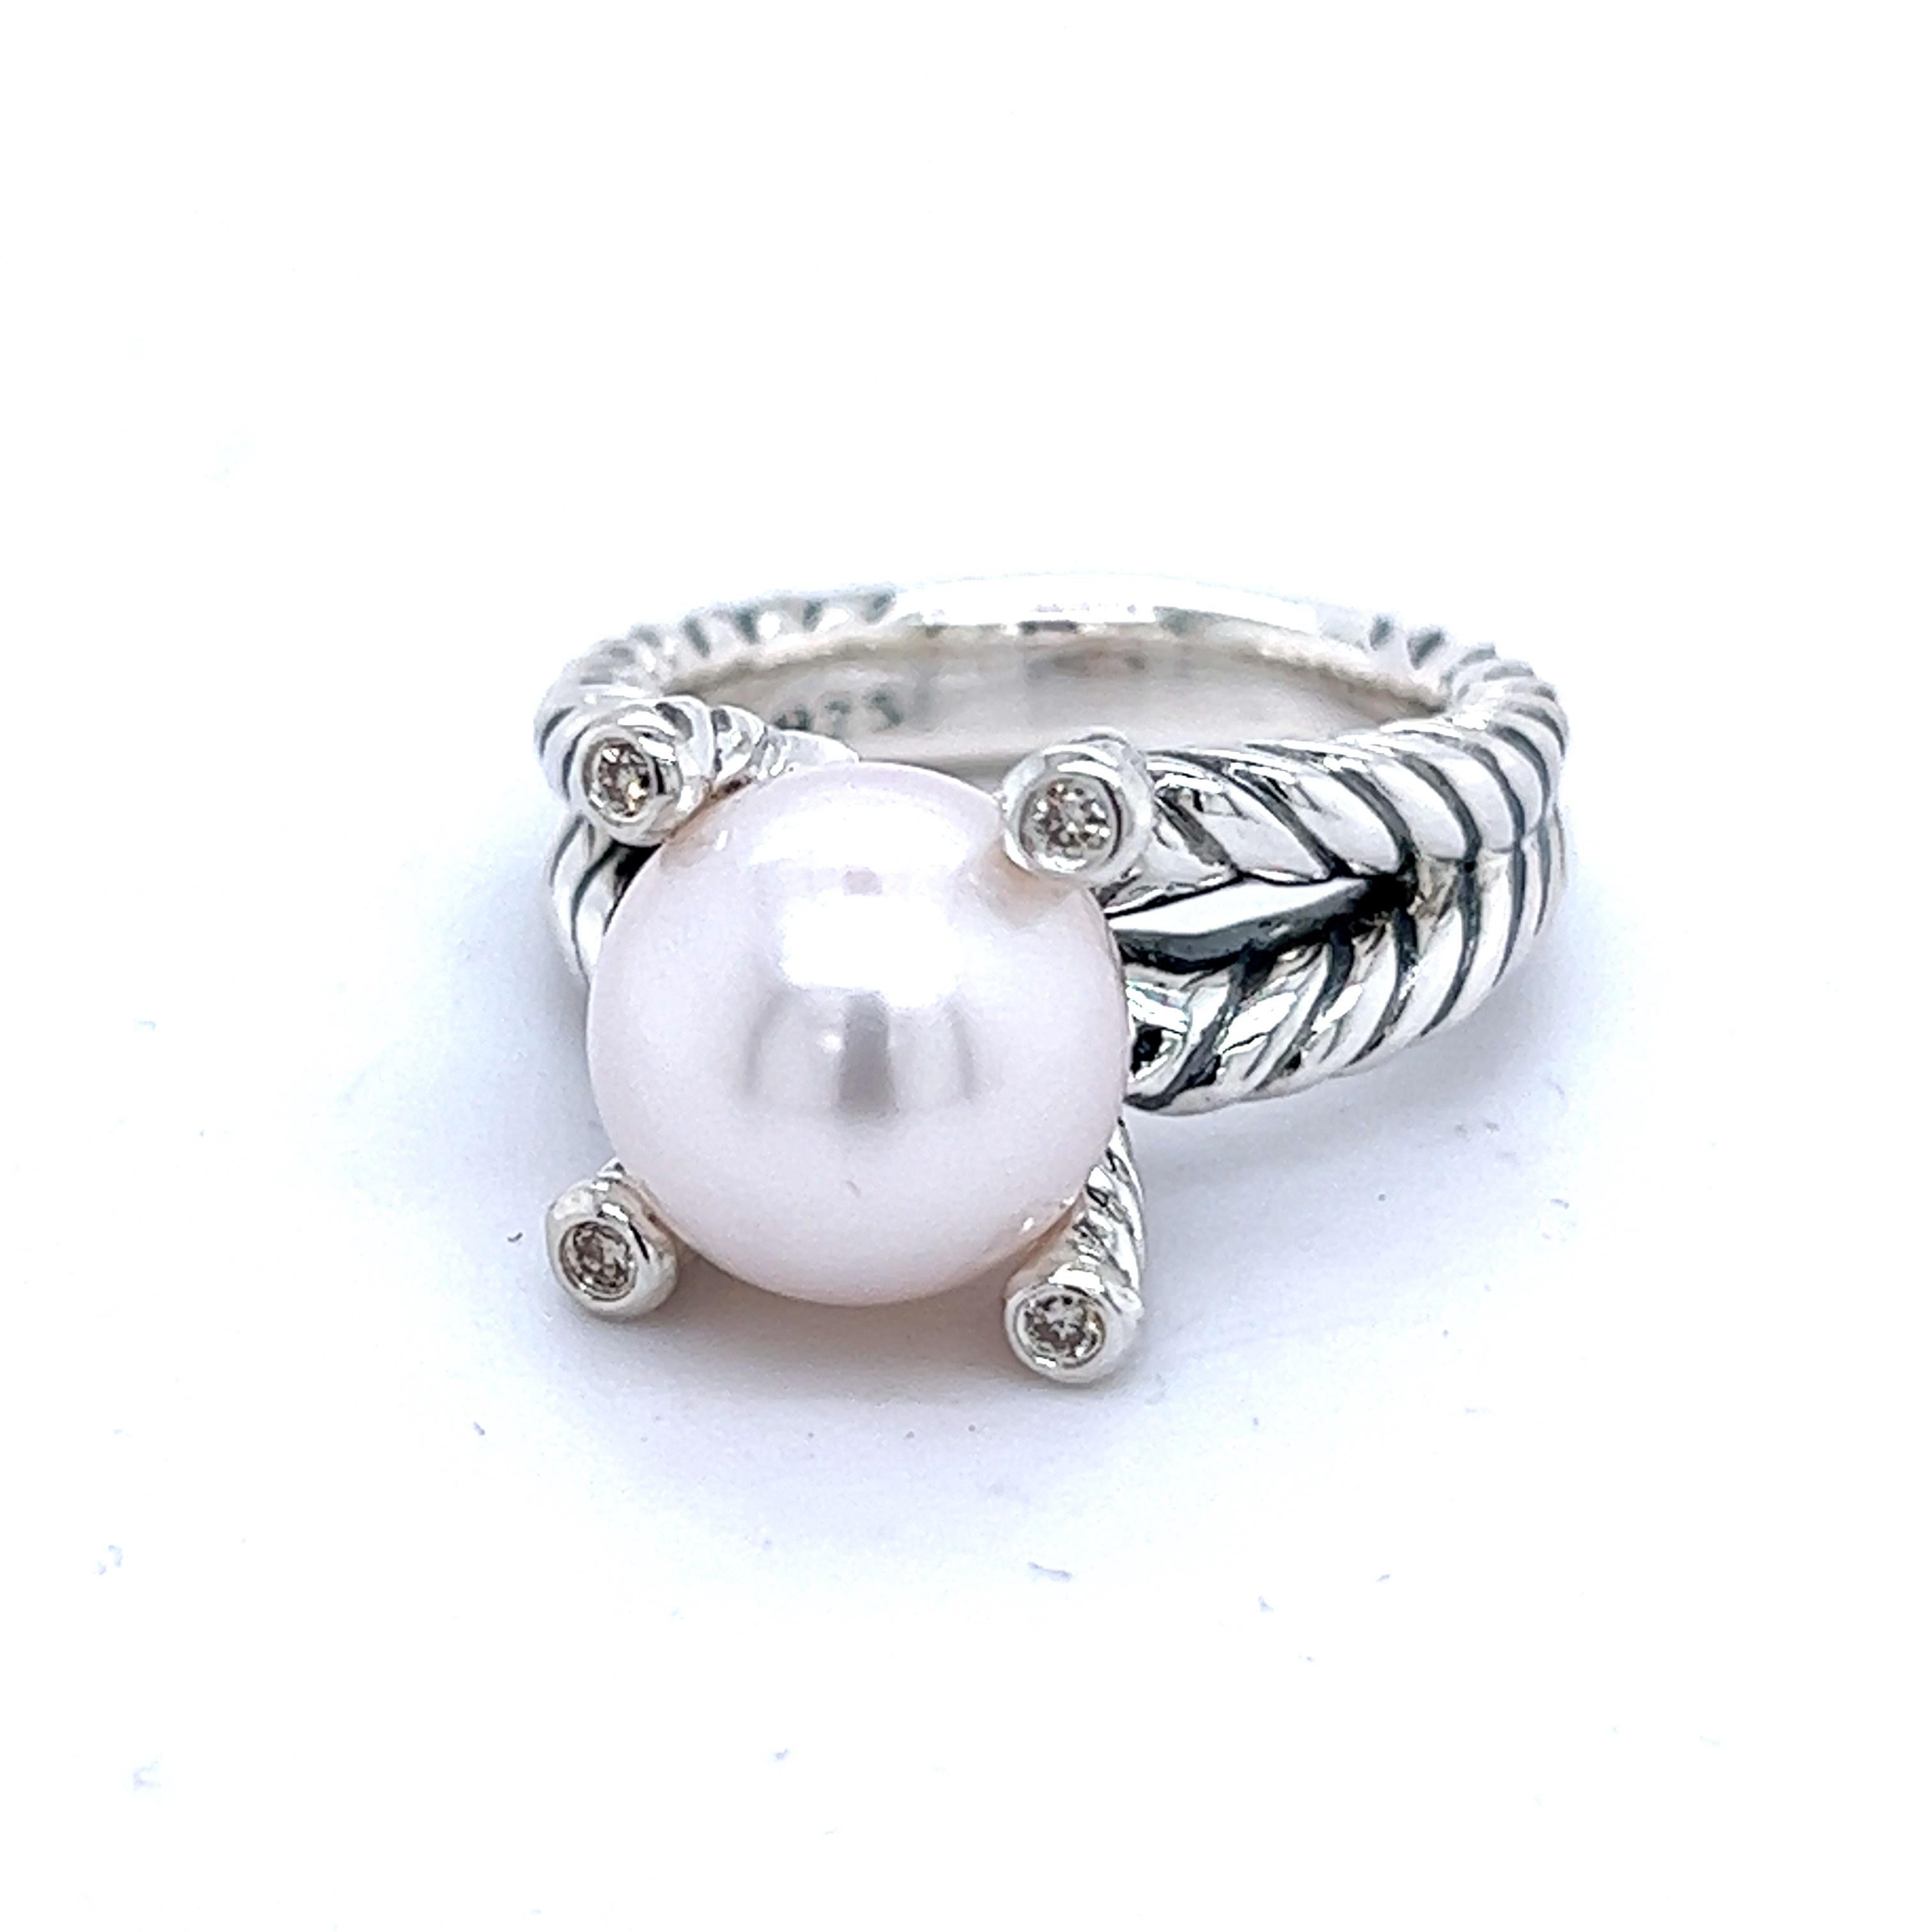 David Yurman Authentic Estate Pearl Diamond Cable Collectables Ring Size 5 Sterling Silver 0.05 CT DY174

RETAIL $990

Cable Collectables 10.5 MM

This elegant Authentic David Yurman ring is made of sterling silver.

TRUSTED SELLER SINCE